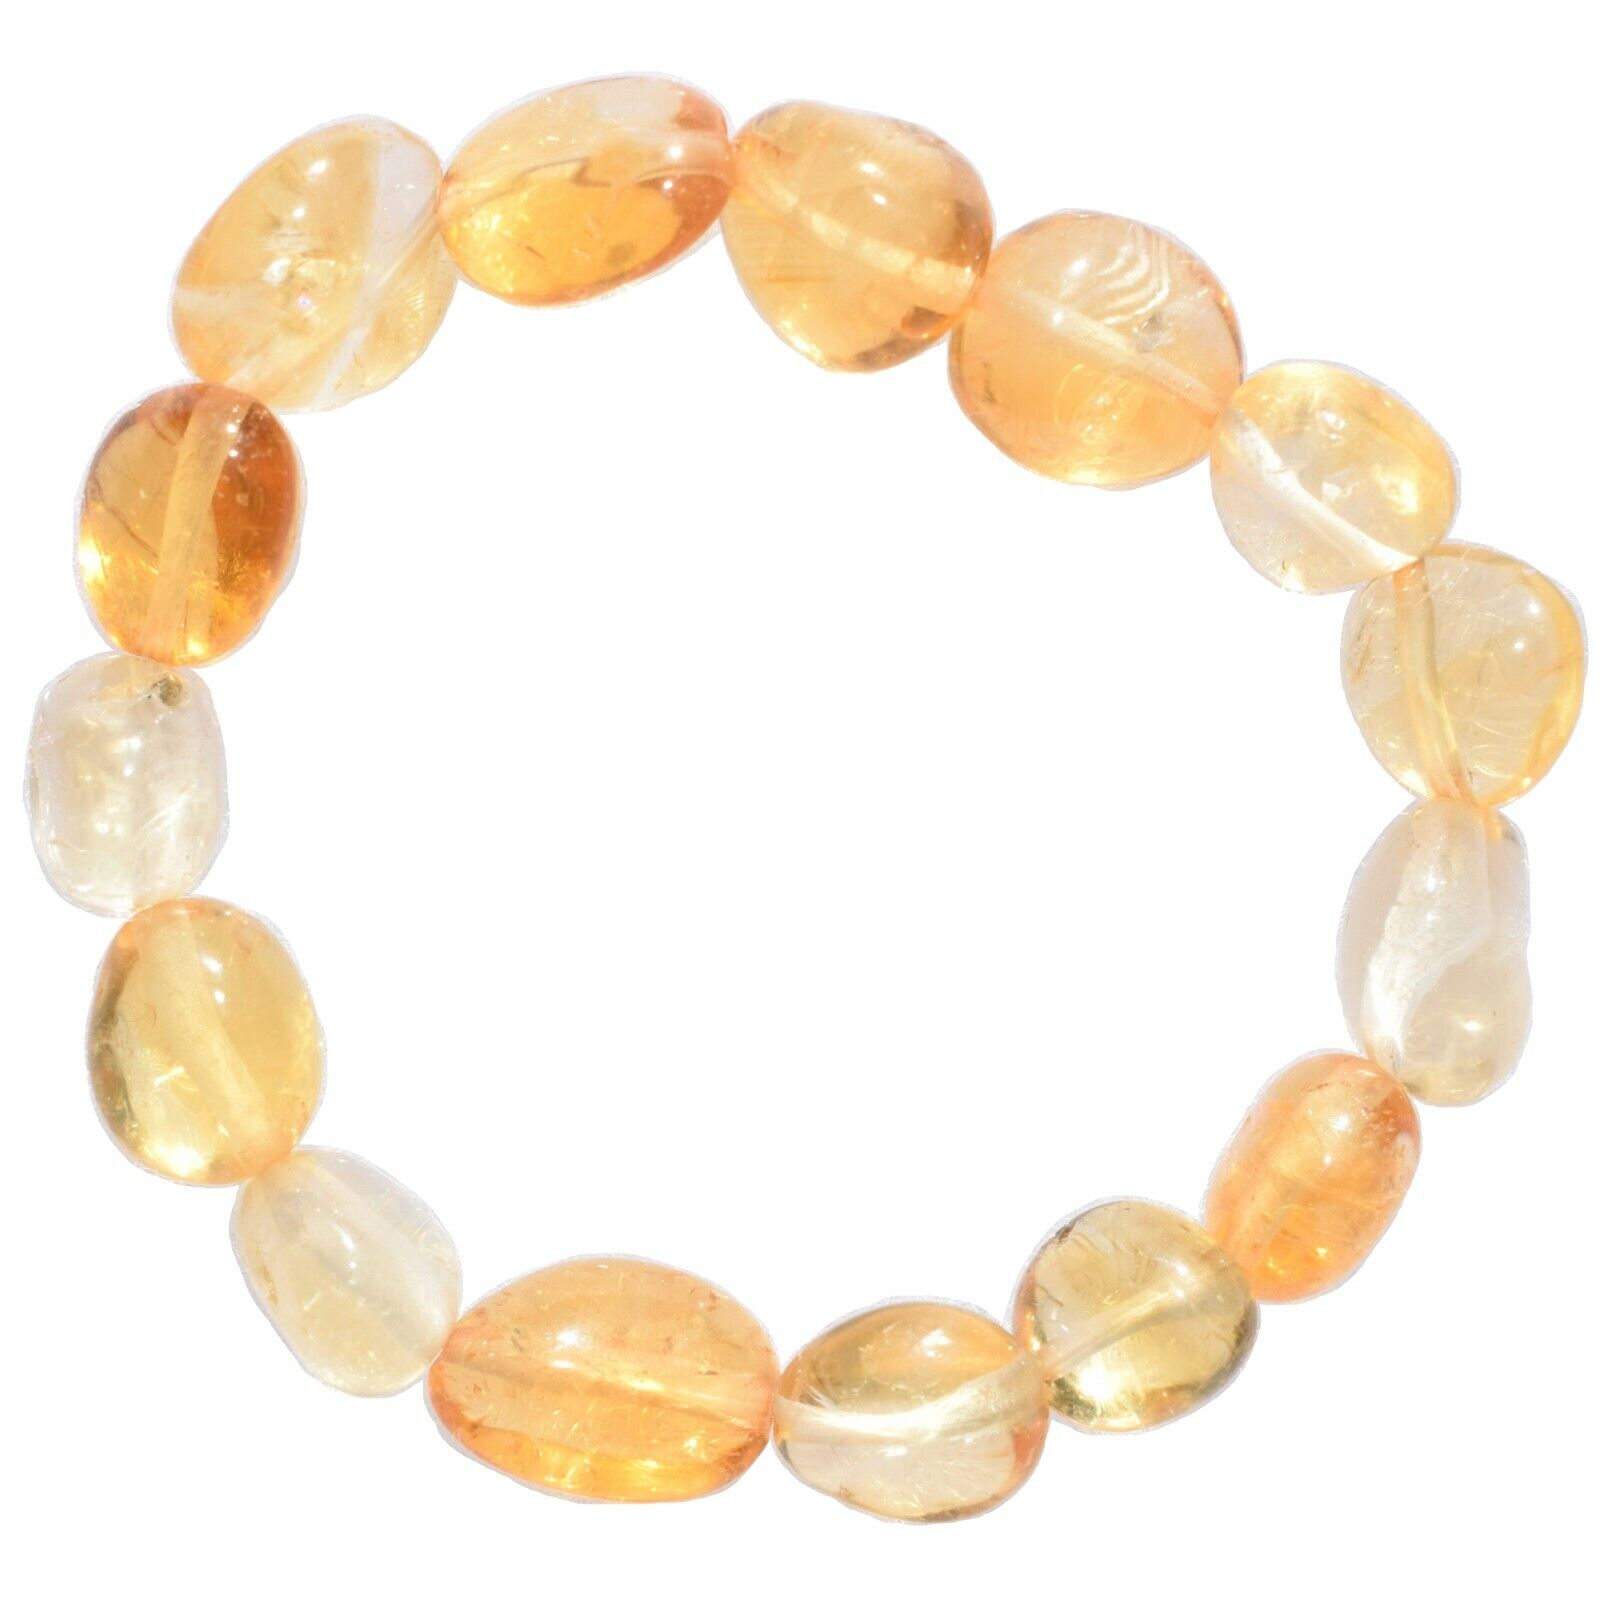 Premium CHARGED Citrine Crystal Nugget Stretchy Bracelet + Selenite Puffy Heart